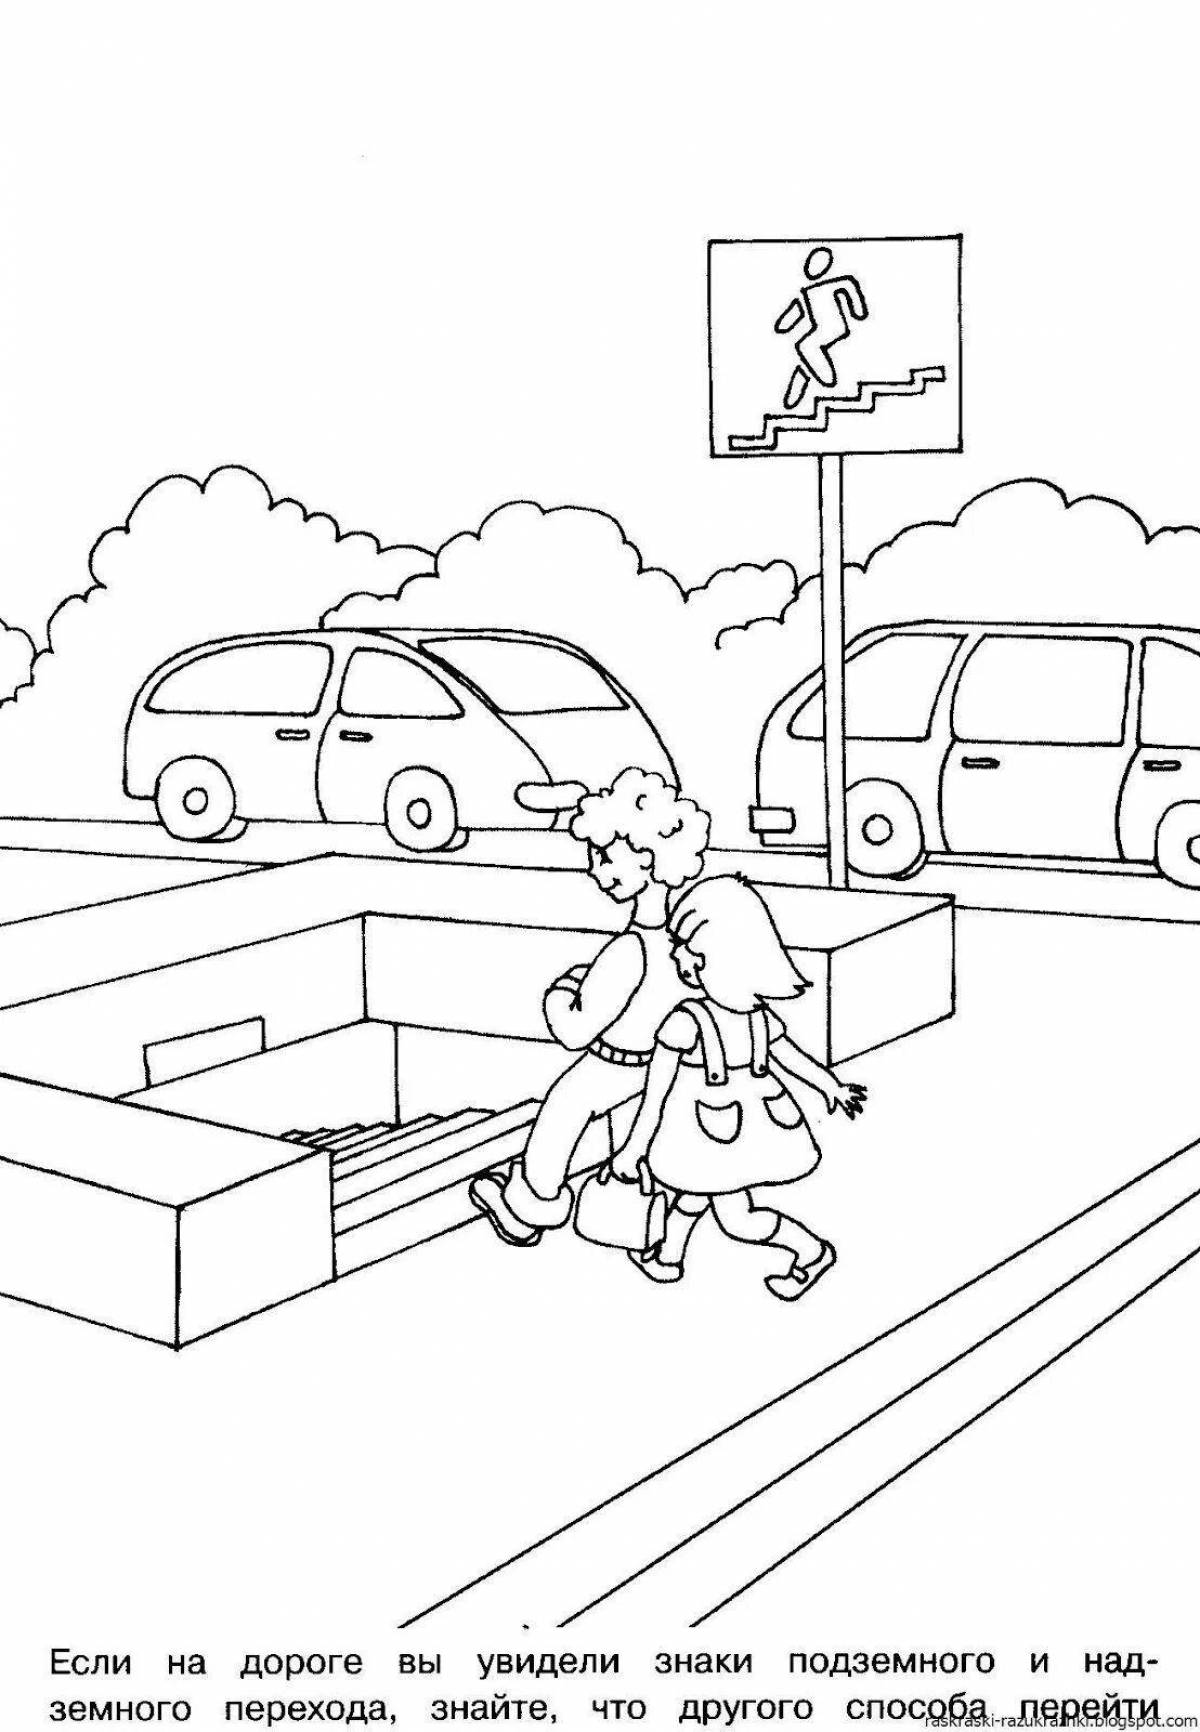 Vivid rules of the road coloring book for 1st grade